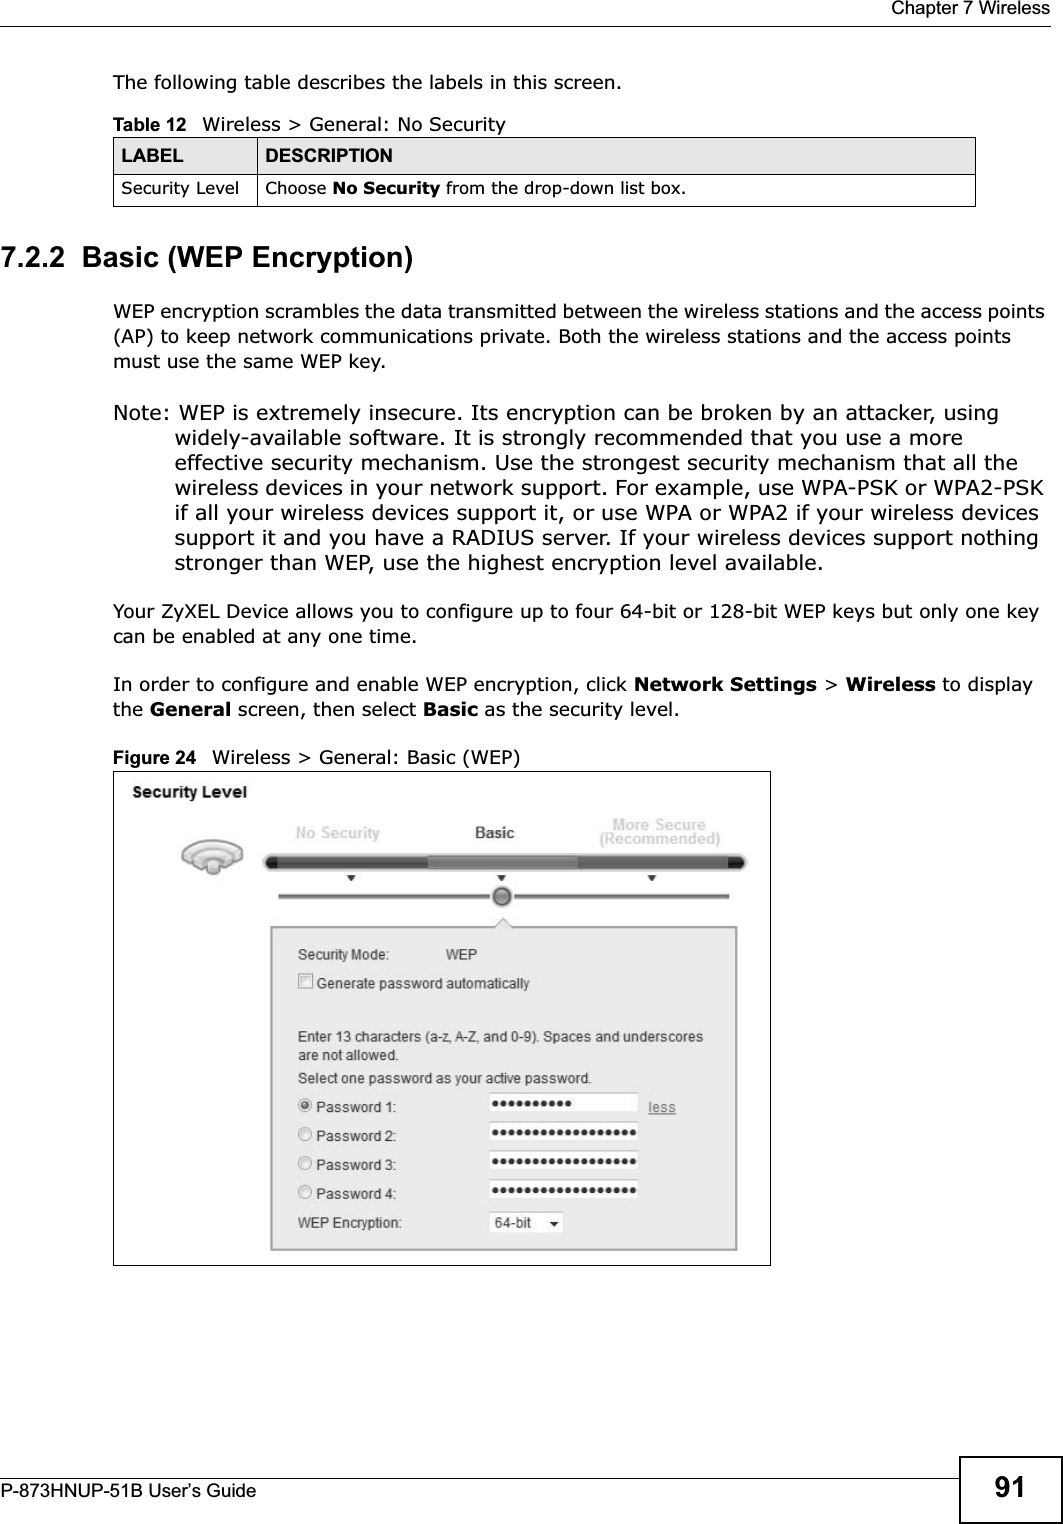  Chapter 7 WirelessP-873HNUP-51B User’s Guide 91The following table describes the labels in this screen.7.2.2  Basic (WEP Encryption)WEP encryption scrambles the data transmitted between the wireless stations and the access points (AP) to keep network communications private. Both the wireless stations and the access points must use the same WEP key.Note: WEP is extremely insecure. Its encryption can be broken by an attacker, using widely-available software. It is strongly recommended that you use a more effective security mechanism. Use the strongest security mechanism that all the wireless devices in your network support. For example, use WPA-PSK or WPA2-PSK if all your wireless devices support it, or use WPA or WPA2 if your wireless devices support it and you have a RADIUS server. If your wireless devices support nothing stronger than WEP, use the highest encryption level available.Your ZyXEL Device allows you to configure up to four 64-bit or 128-bit WEP keys but only one key can be enabled at any one time.In order to configure and enable WEP encryption, click Network Settings &gt; Wireless to display the General screen, then select Basic as the security level.Figure 24   Wireless &gt; General: Basic (WEP) Table 12   Wireless &gt; General: No SecurityLABEL DESCRIPTIONSecurity Level Choose No Security from the drop-down list box.